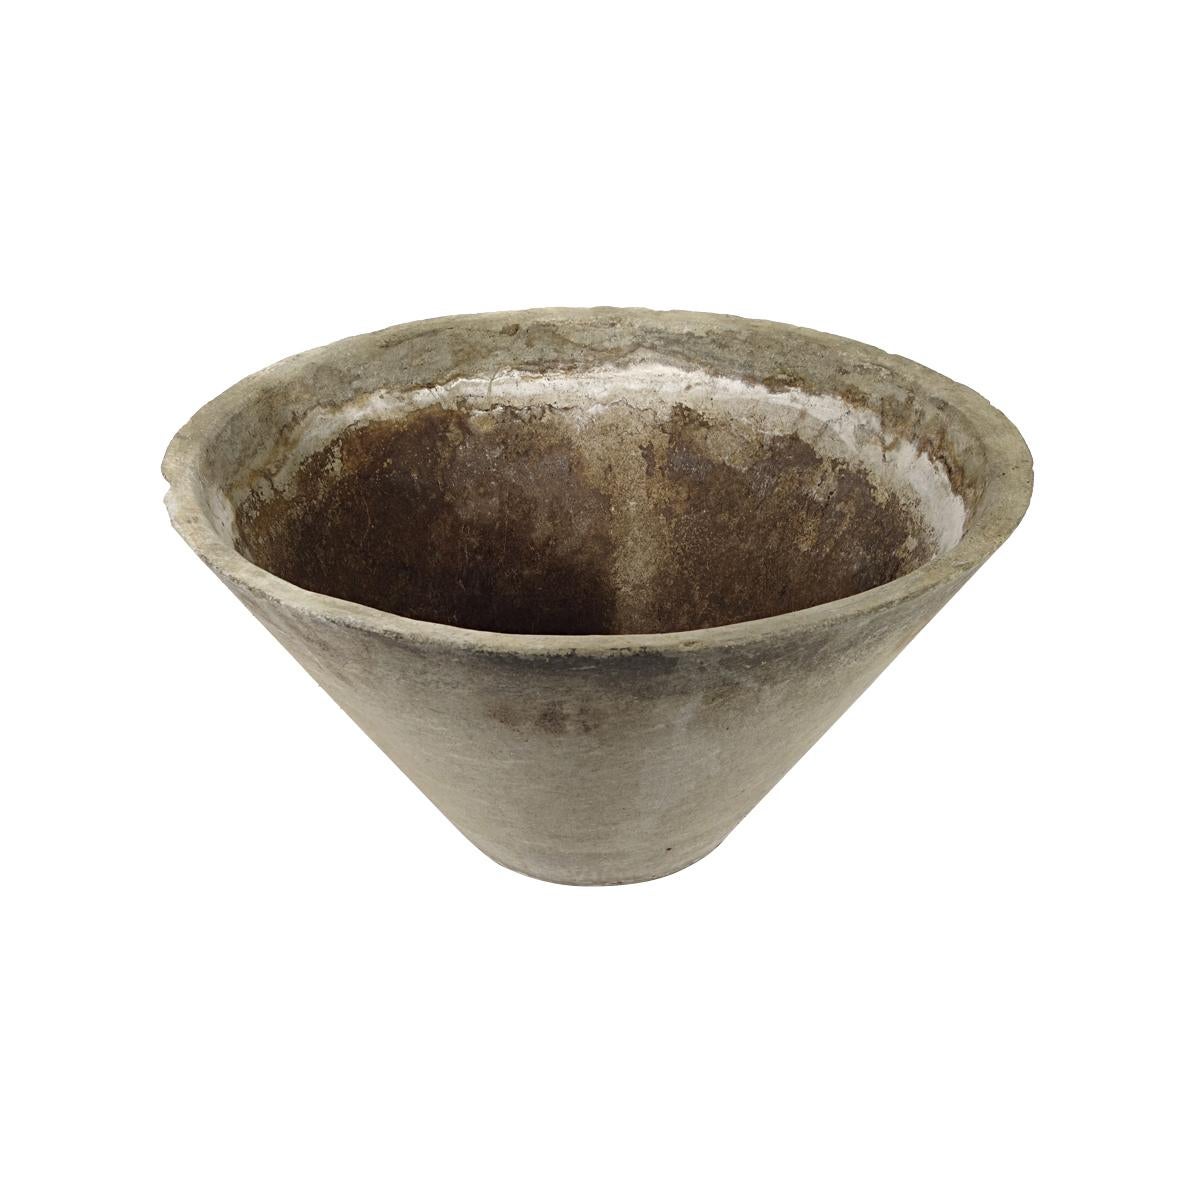 Large planter designed by famous Swiss artist, designer and architect Willy Guhl. The planter has a conical shape. With its beautiful patina it will make a great statement on your rooftop, patio or living room.
The planter has 5 holes on the bottom